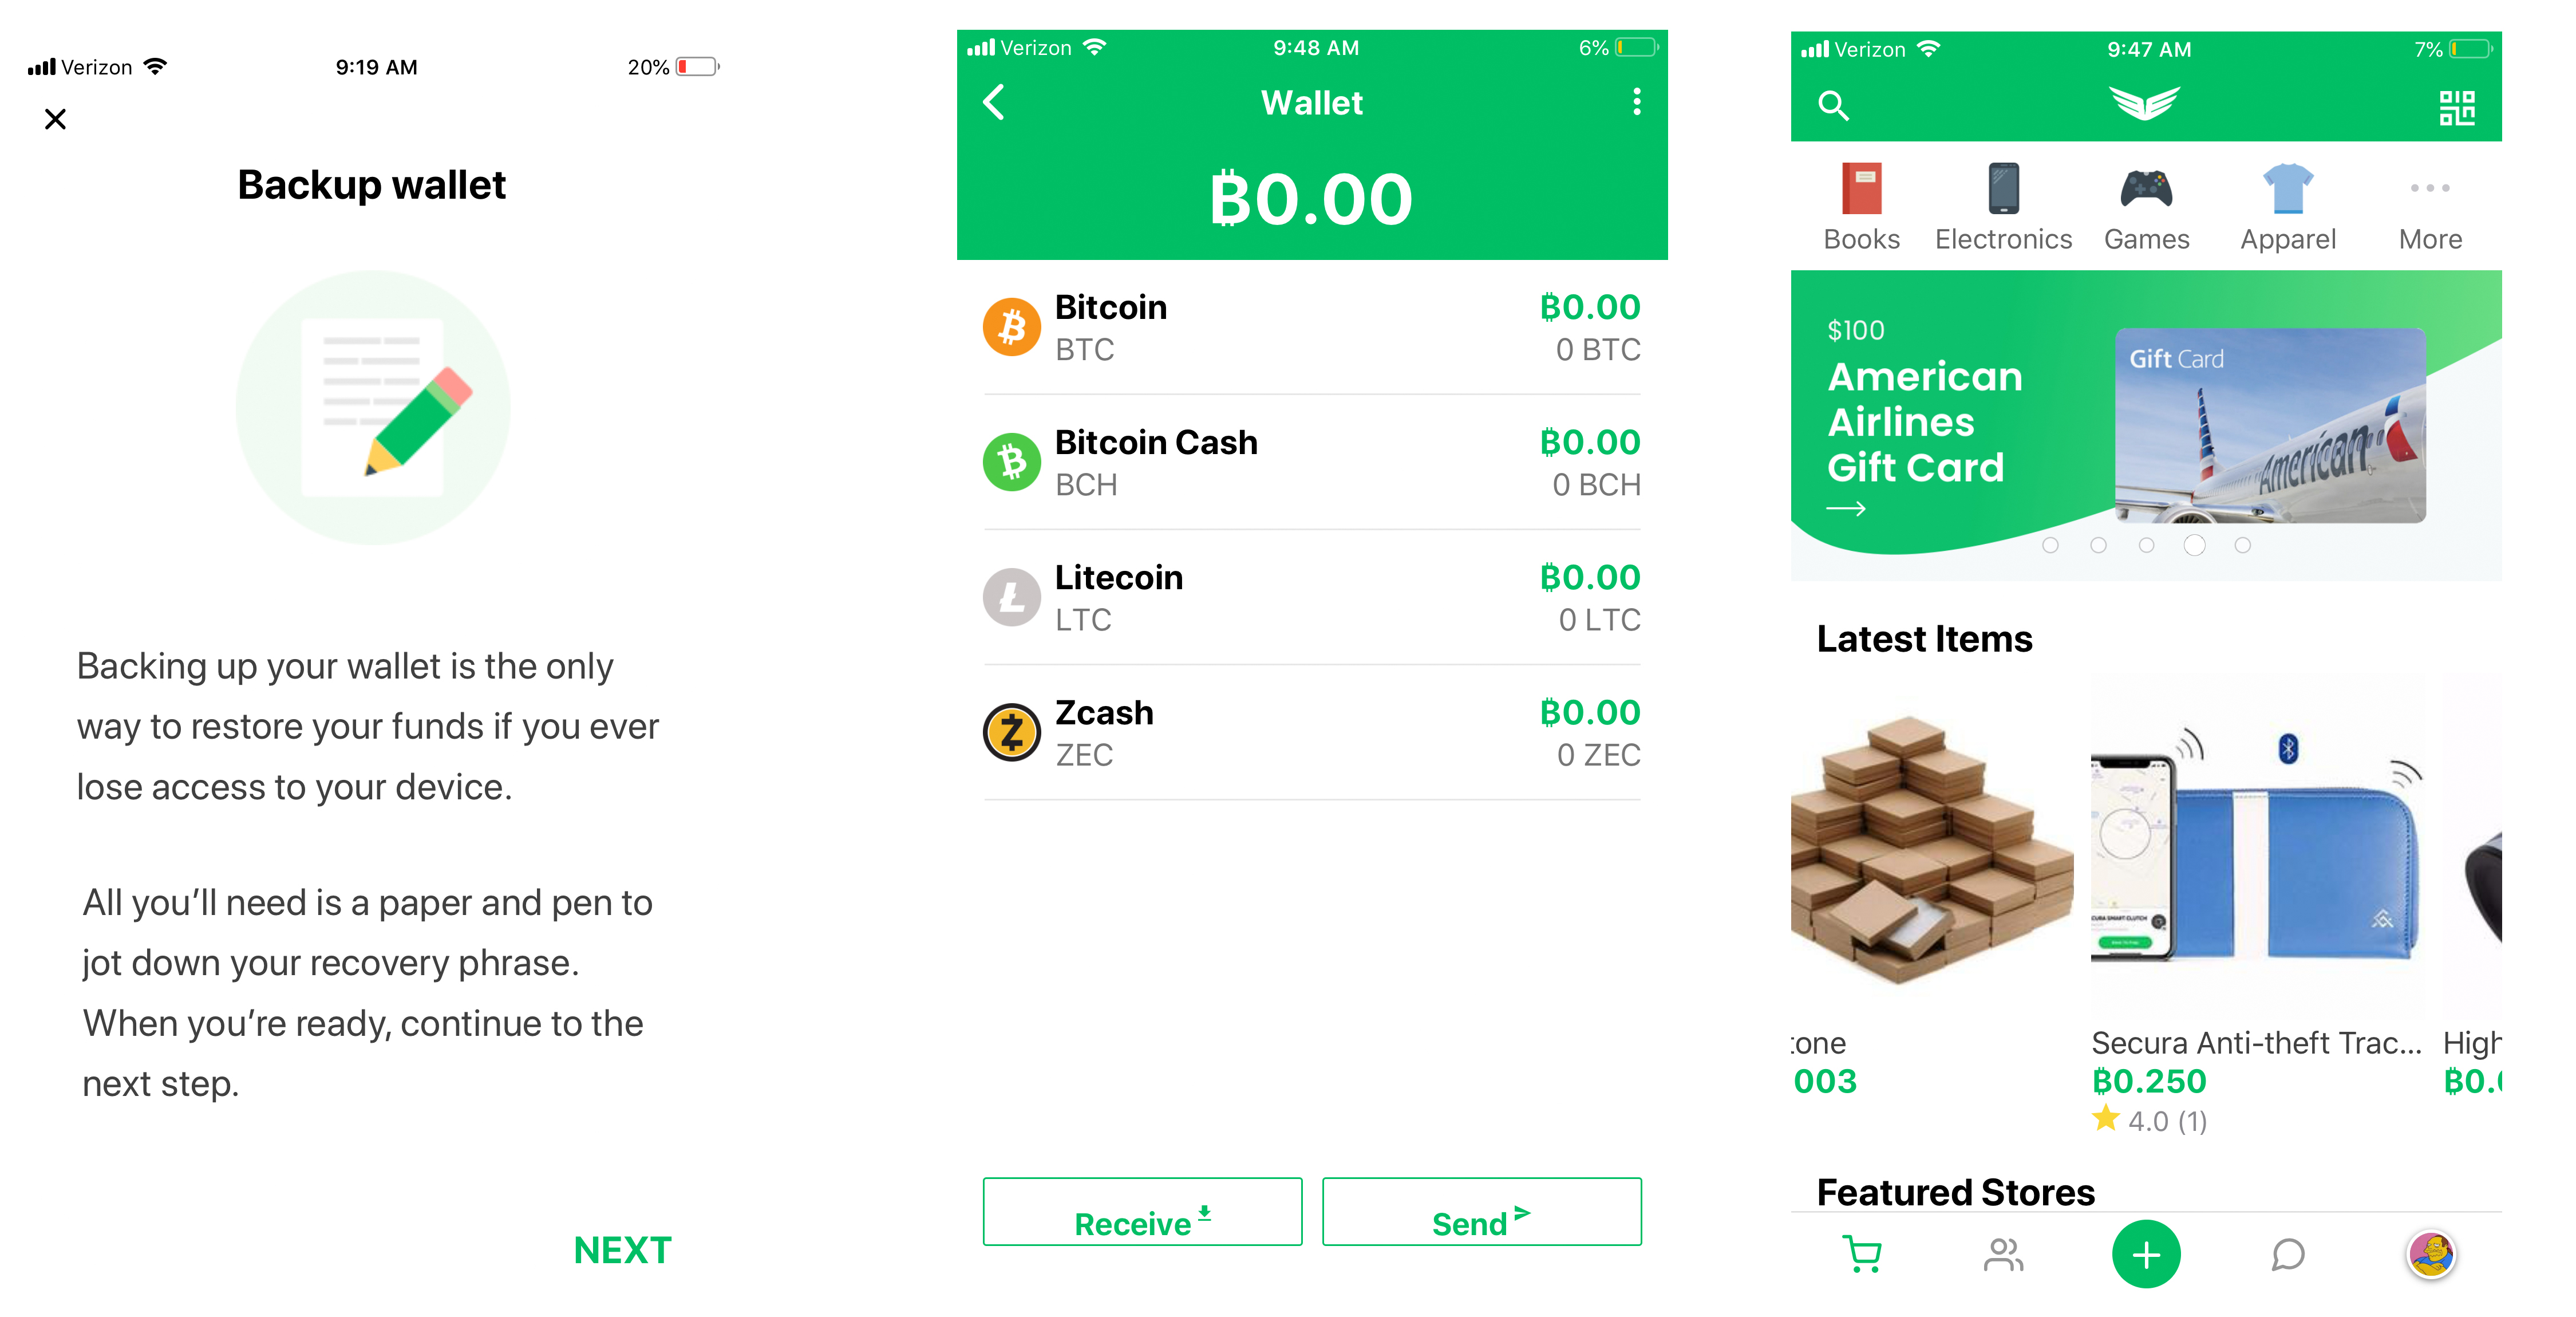 Testing Haven, OB1's New Social Media and Crypto Marketplace App